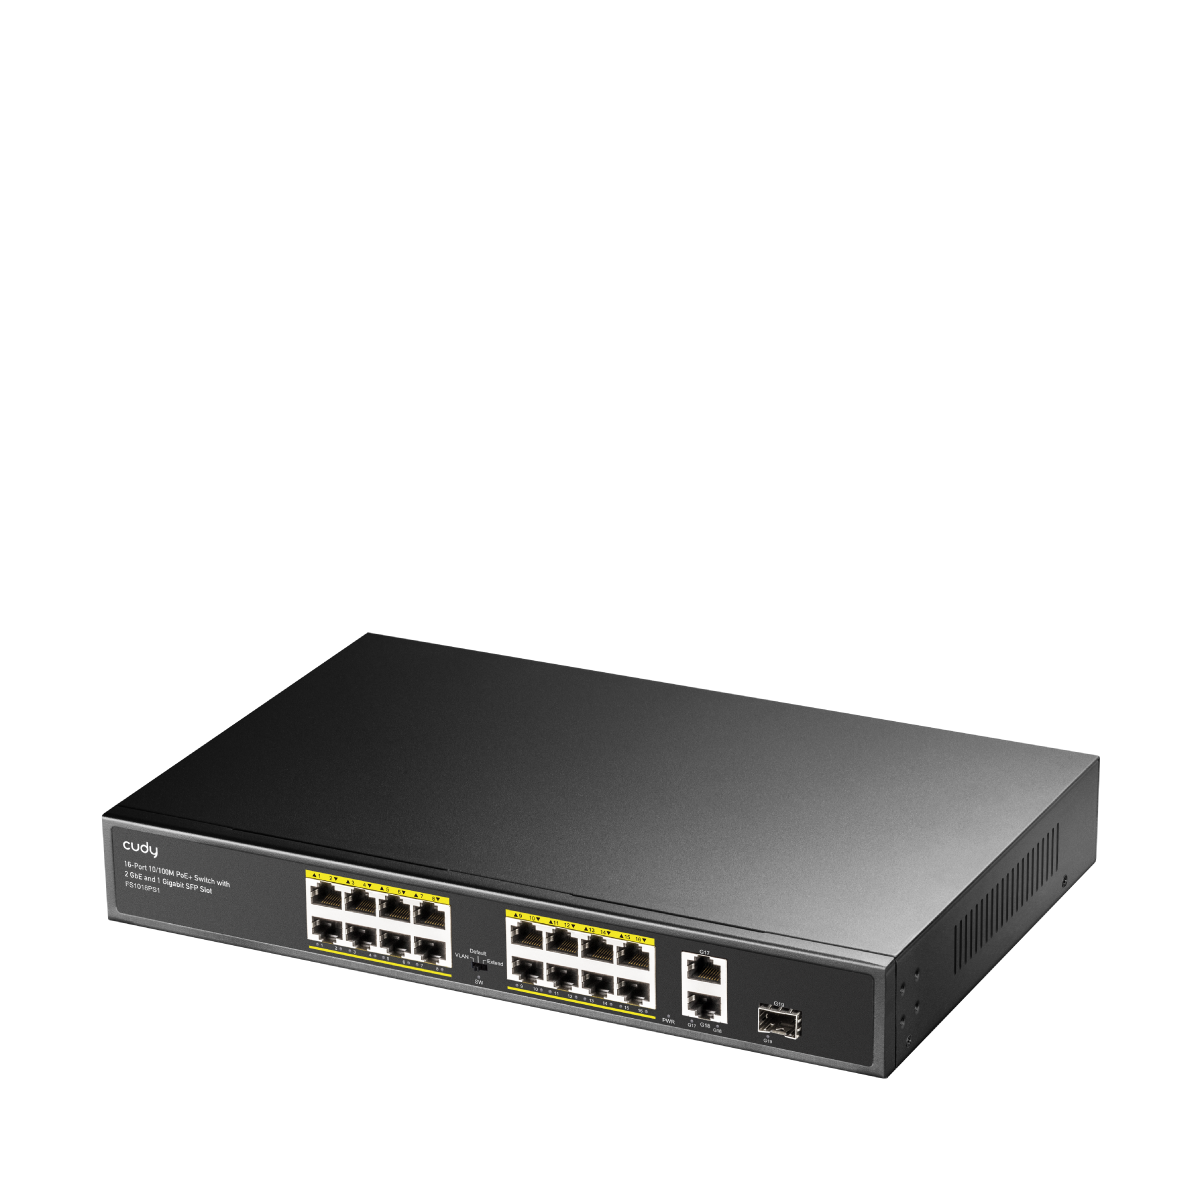 16-FE PoE Switch with 2 Uplink GbE and 1 Uplink SFP, FS1018PS1 3.0